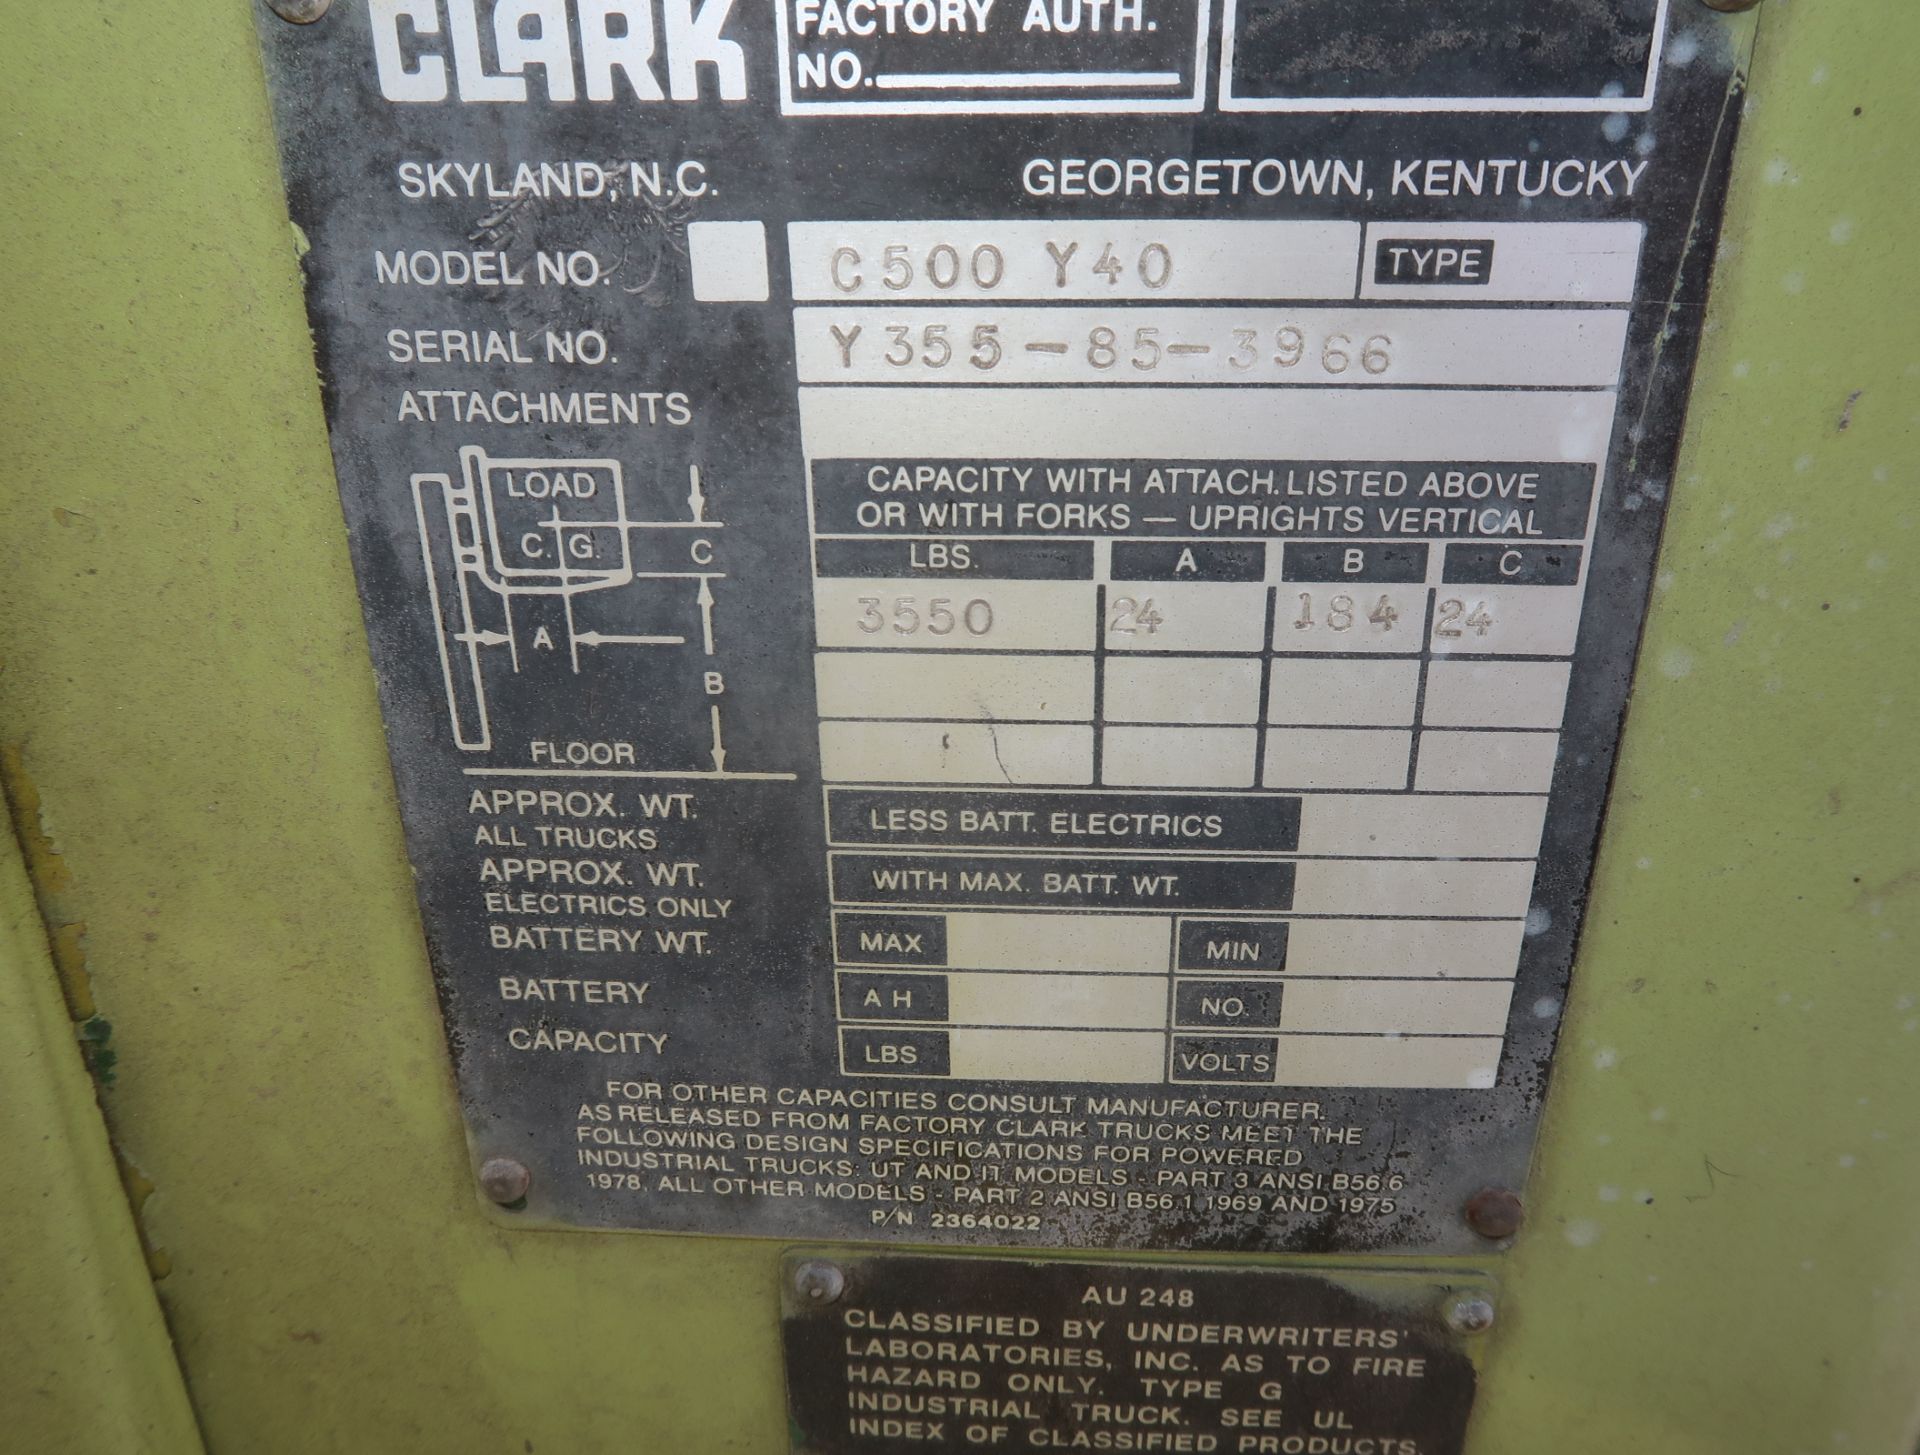 CLARK 4000# PROPANE FORKLIFT, MDL. C500-Y40, SN. 4355-85-3966, PNEUMATIC TIRE, 2-STAGE LIFT. - Image 5 of 6